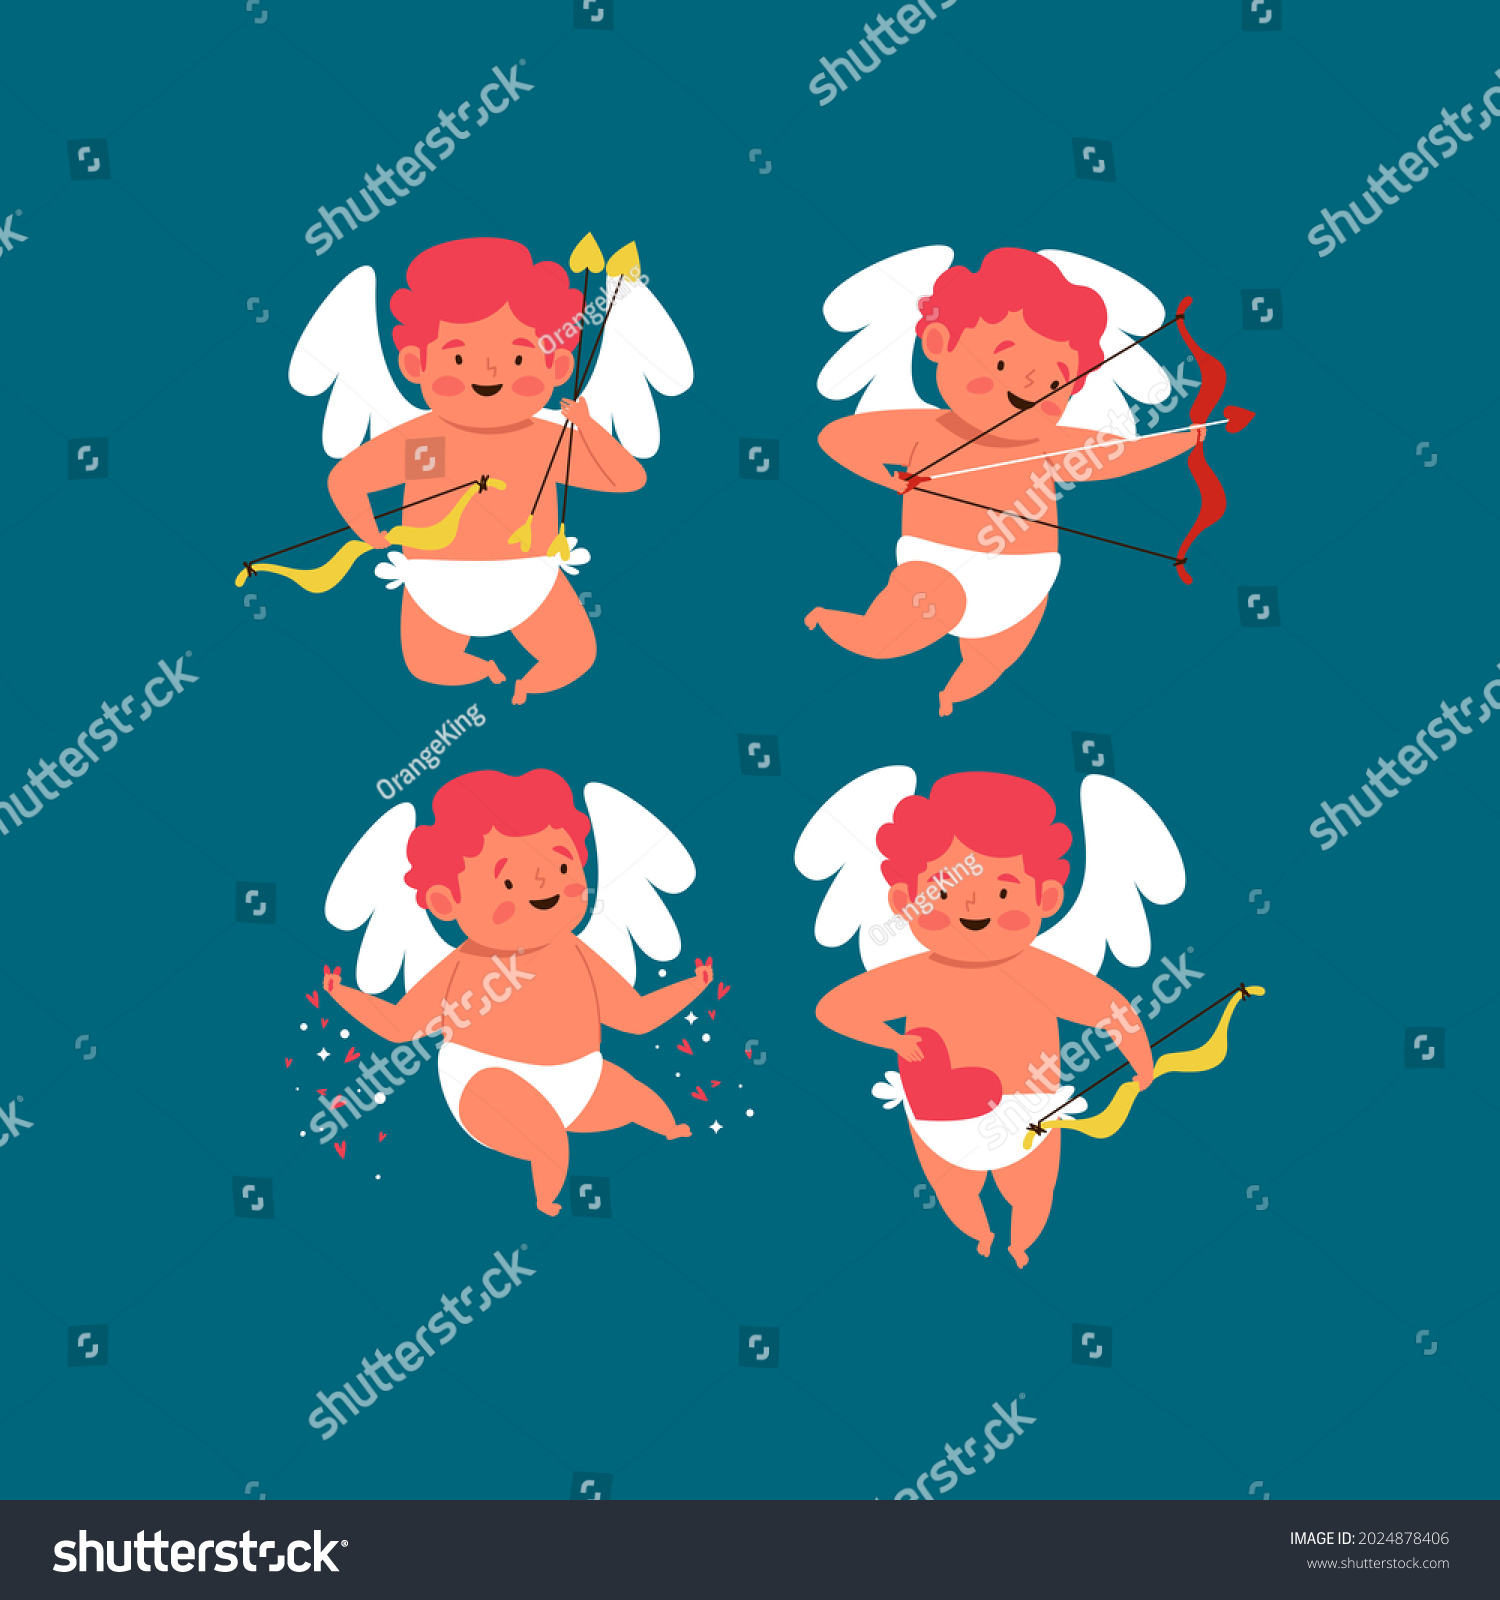 Cartoon Cupid Character Collection Angel Heart Stock Vector Royalty Free 2024878406 Shutterstock 2536